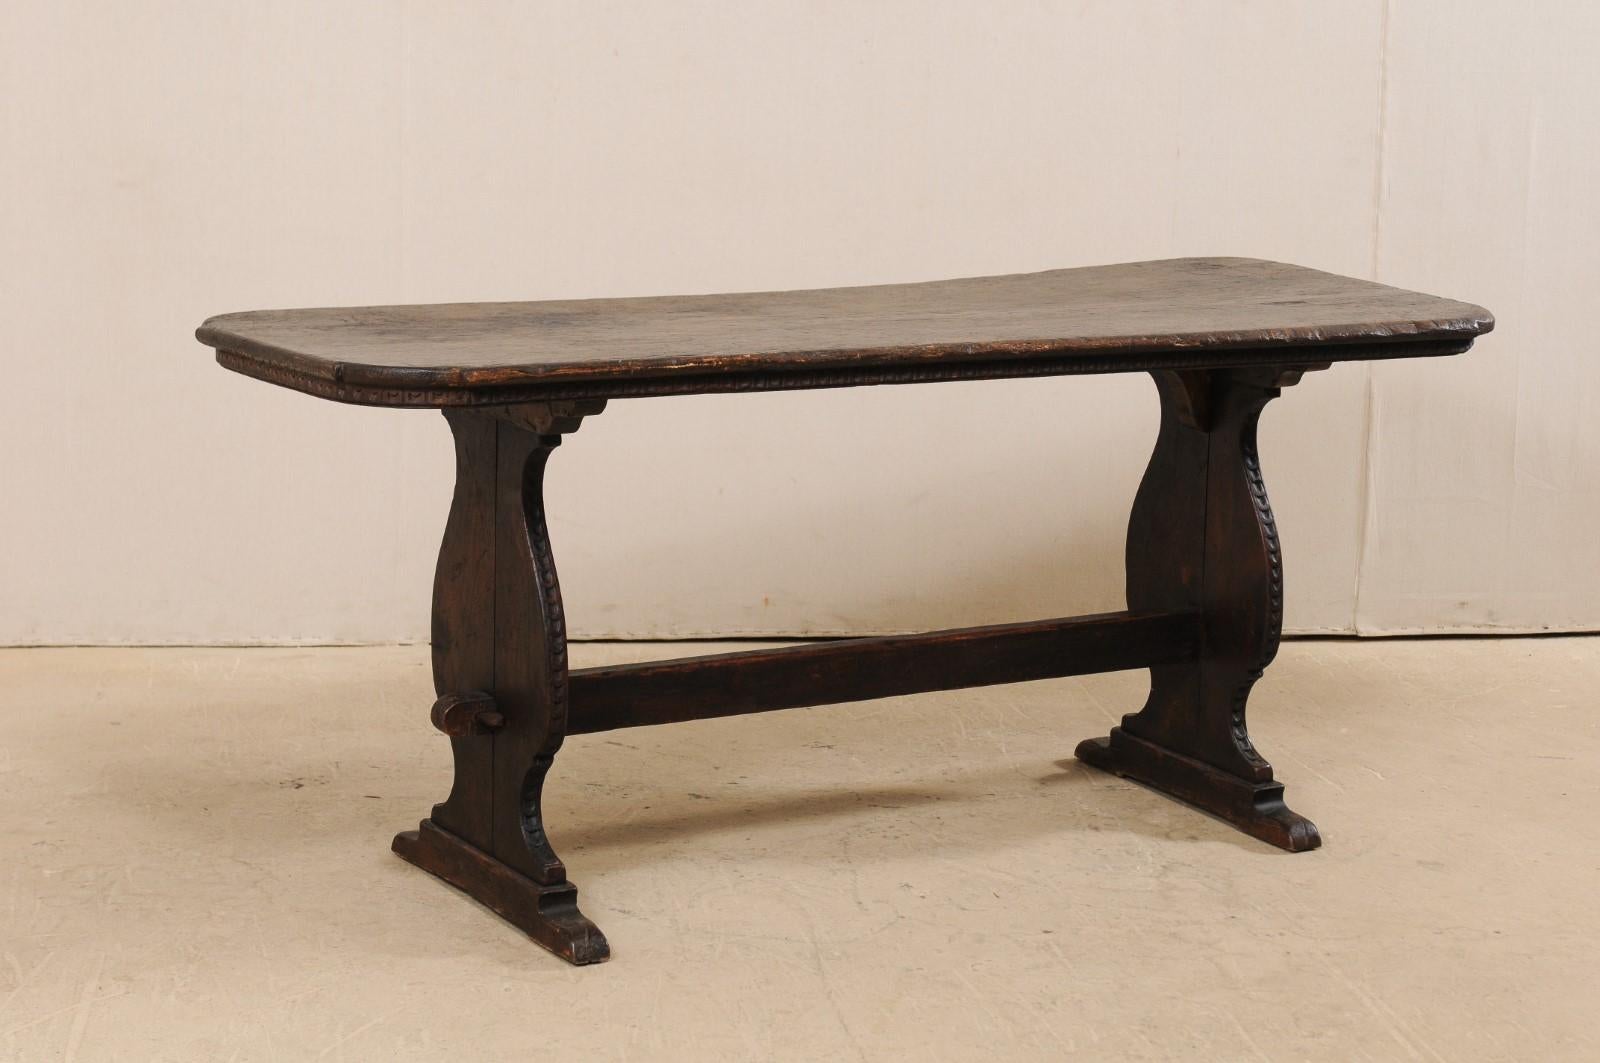 Hand-Carved Handsome Antique Italian Console Desk with Nicely Carved Trestle Style Legs